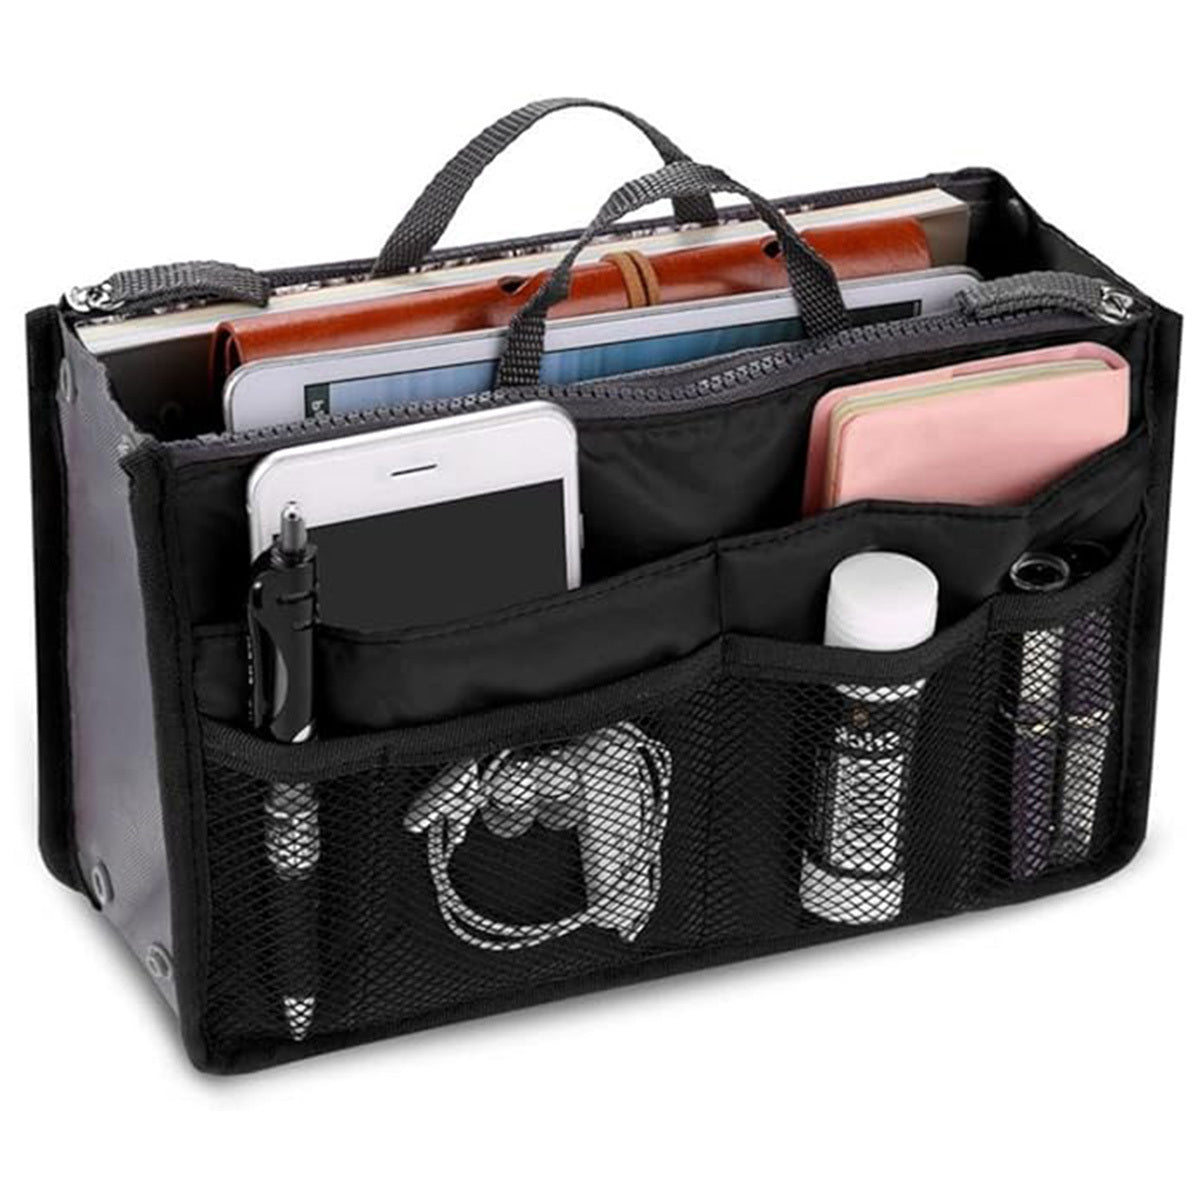 Handbag Organizer Insert For Women With 13 Pockets Large Capacity Lining Zipper Handle Portable Women's Purse Bag Travel Documents Cards Small Items